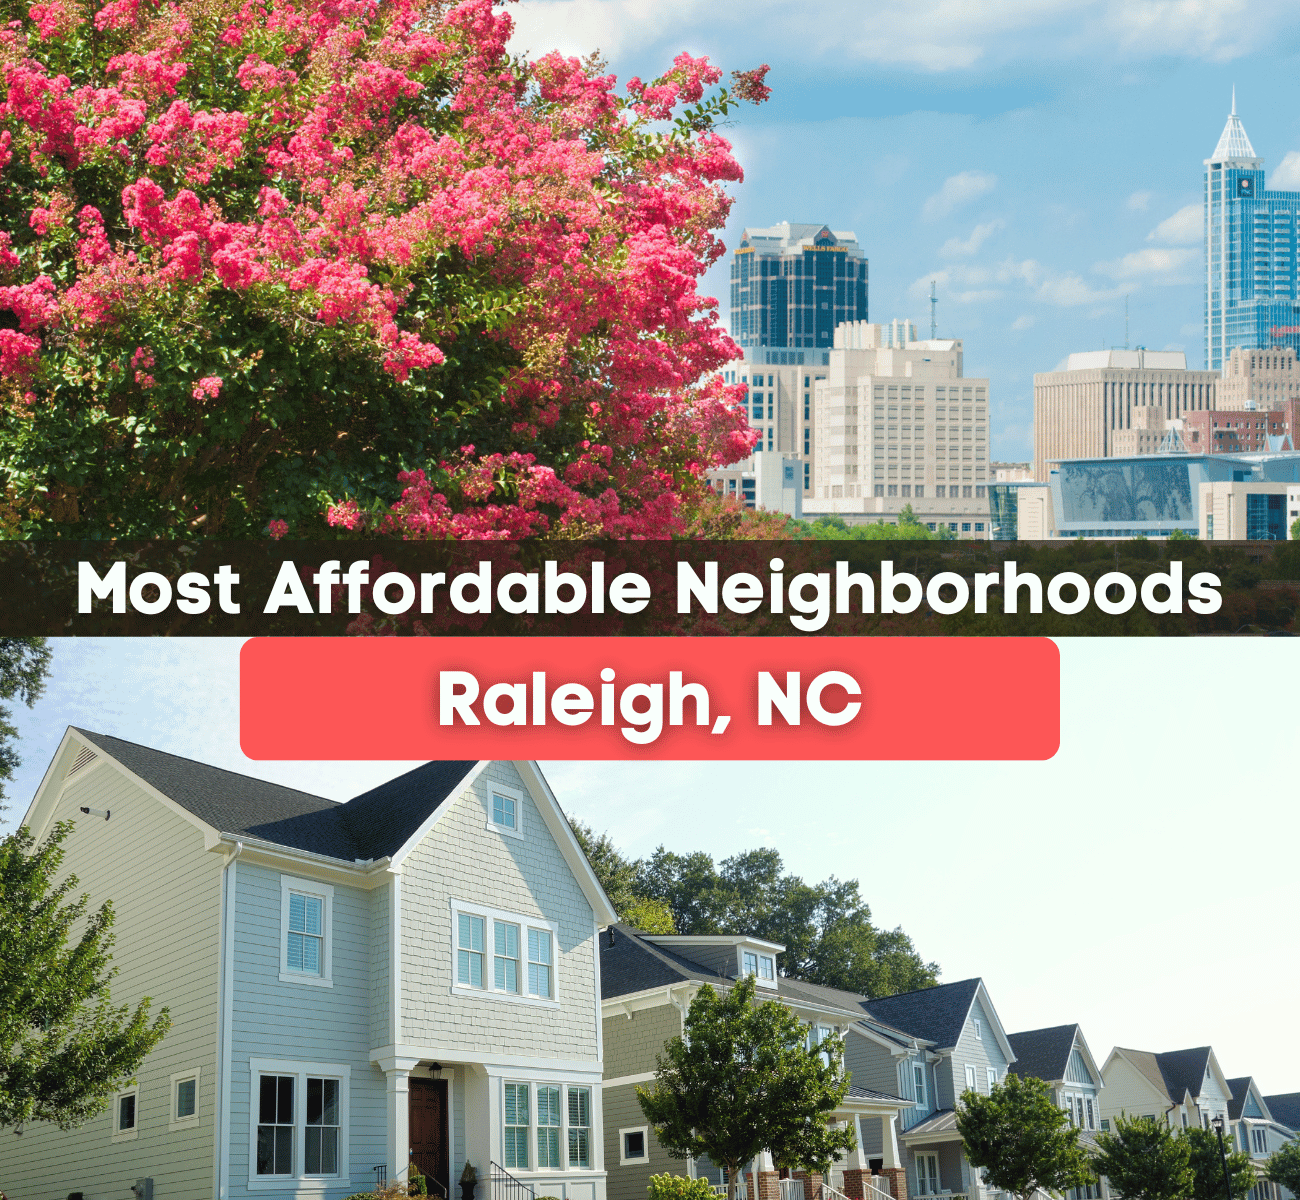 7 Most Affordable Neighborhoods in Raleigh: Raleigh, NC Affordable Living Guide